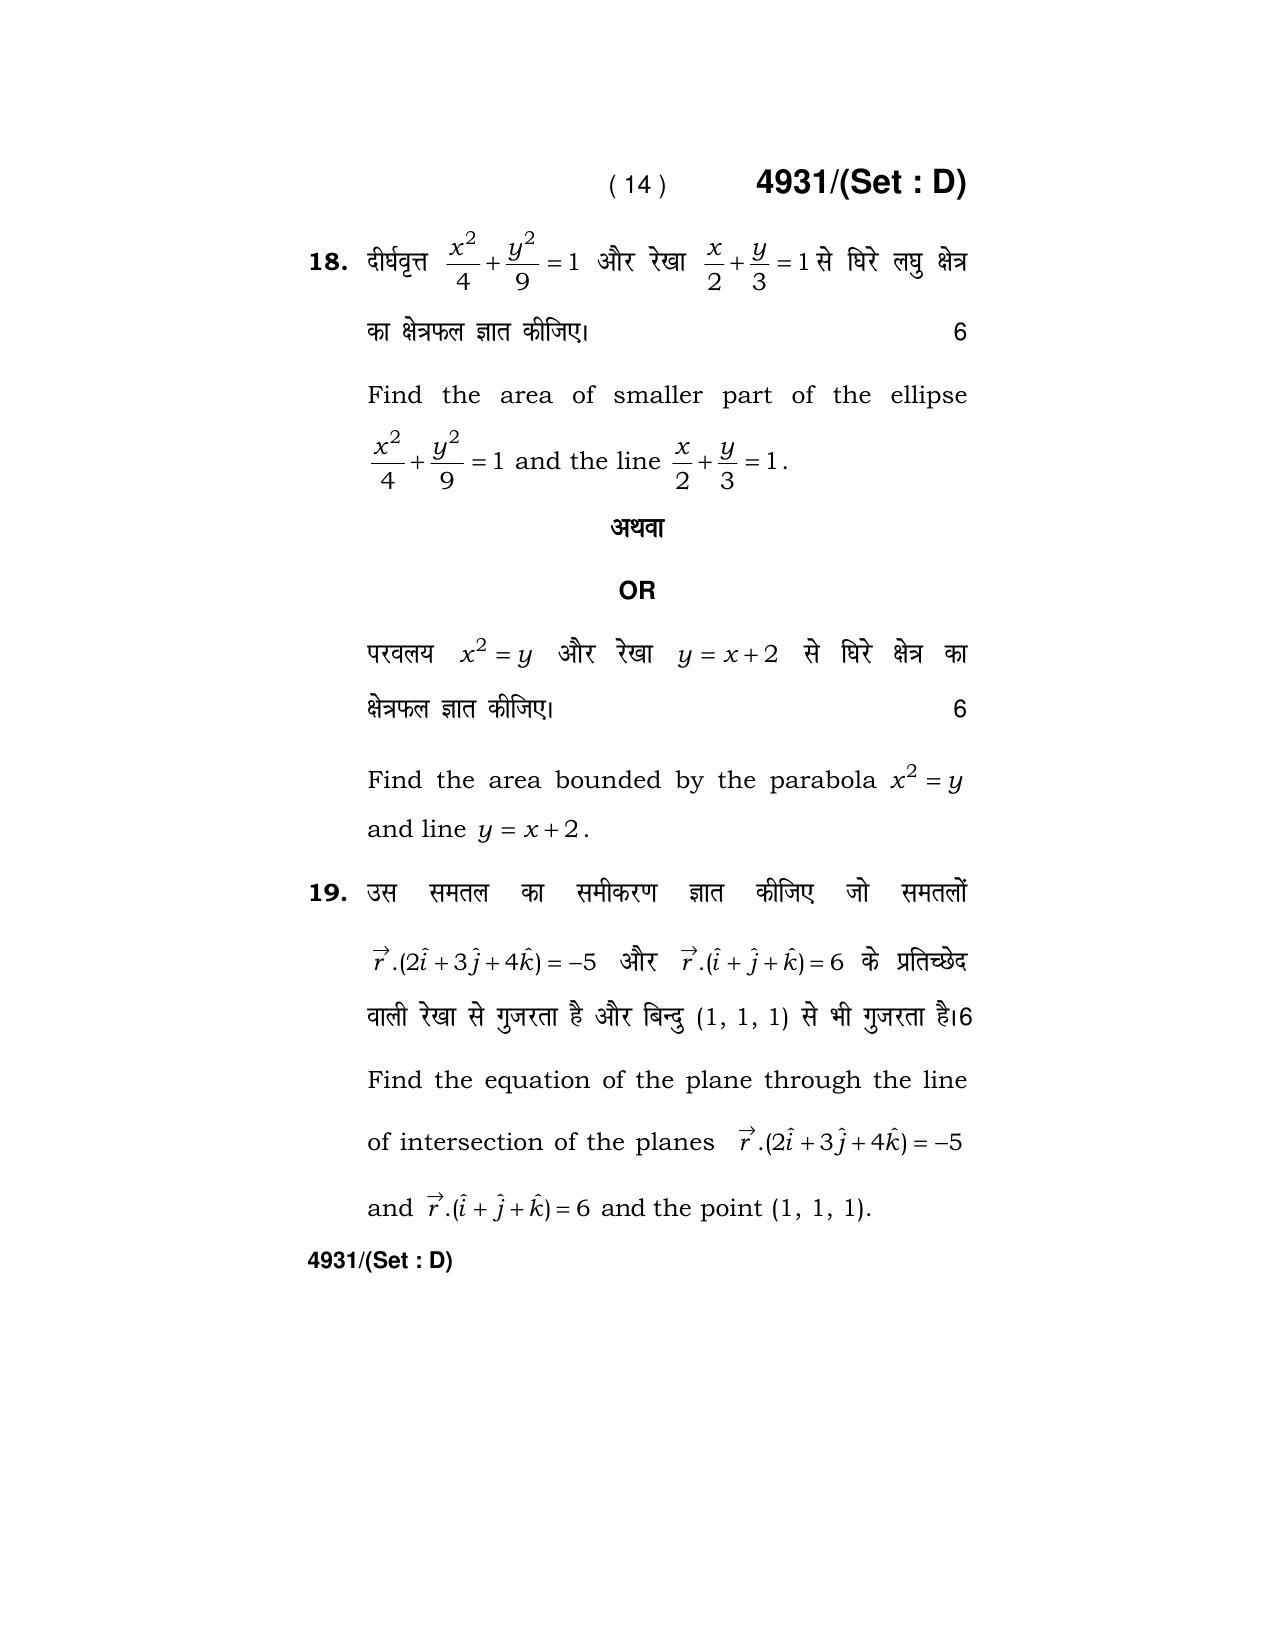 Haryana Board HBSE Class 12 Mathematics 2020 Question Paper - Page 62